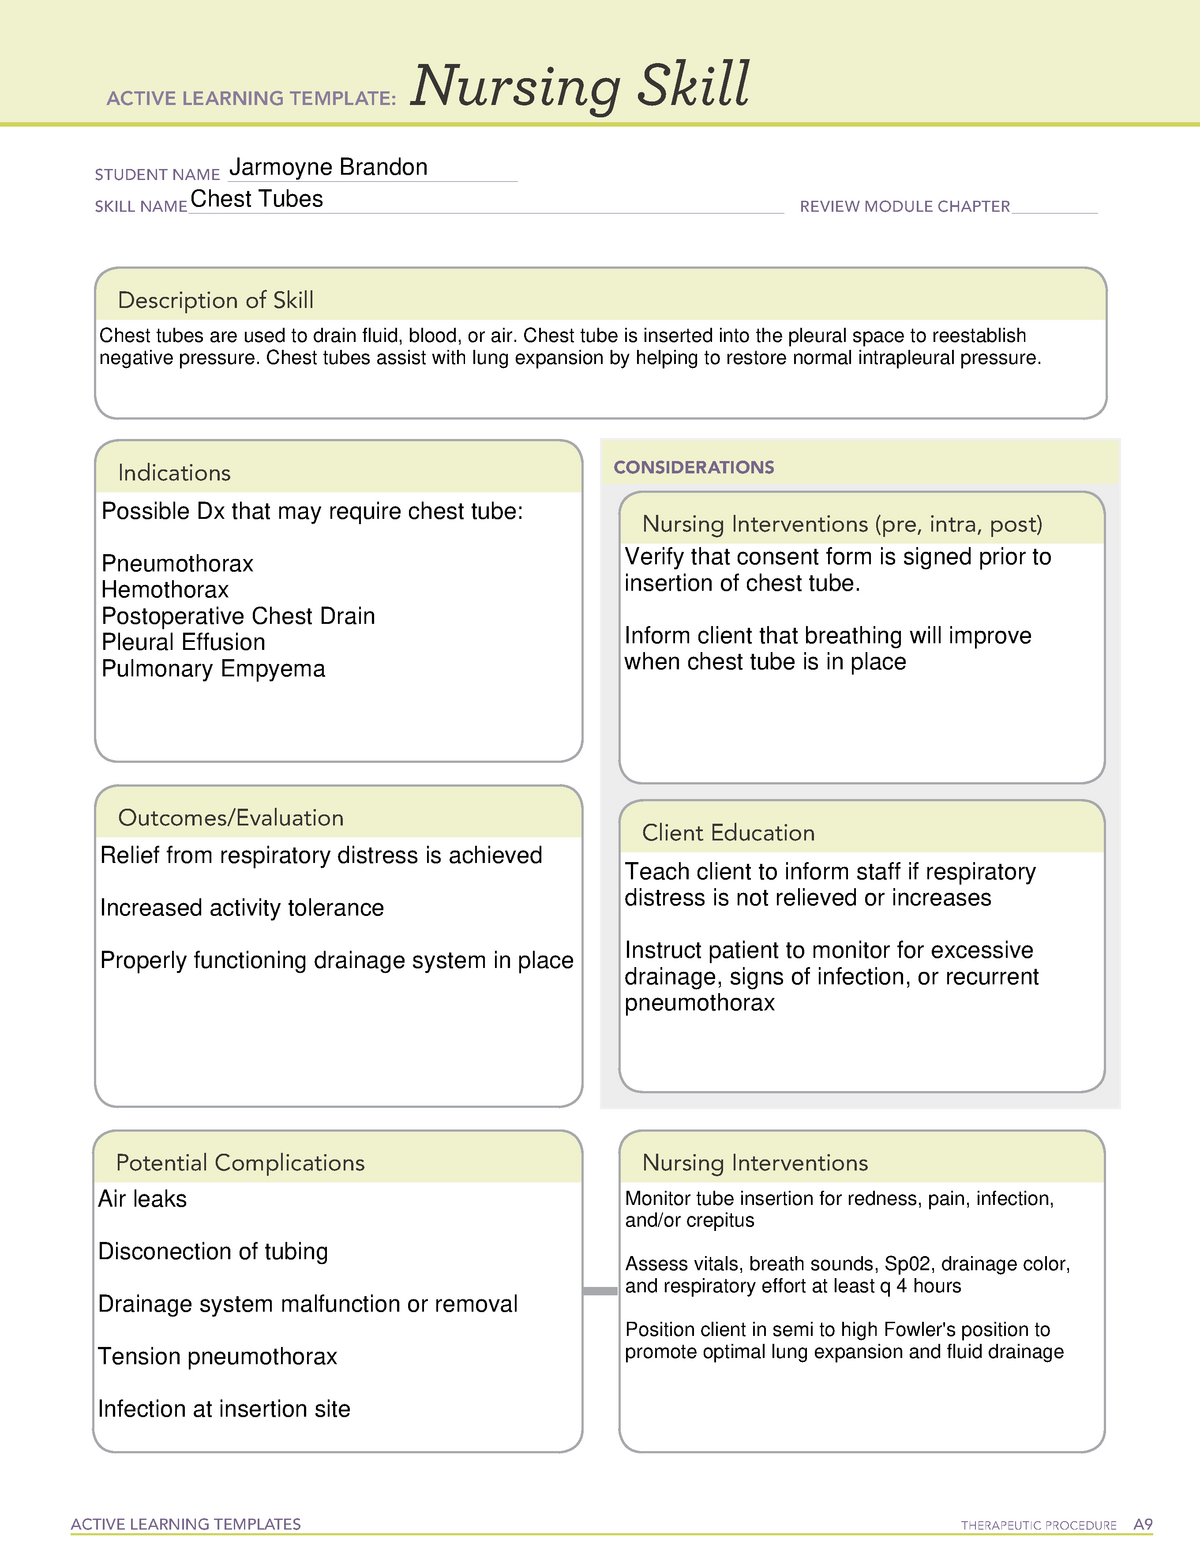 PN II Clinical Nursing Skill IV Chest Tube - ACTIVE LEARNING TEMPLATES ...